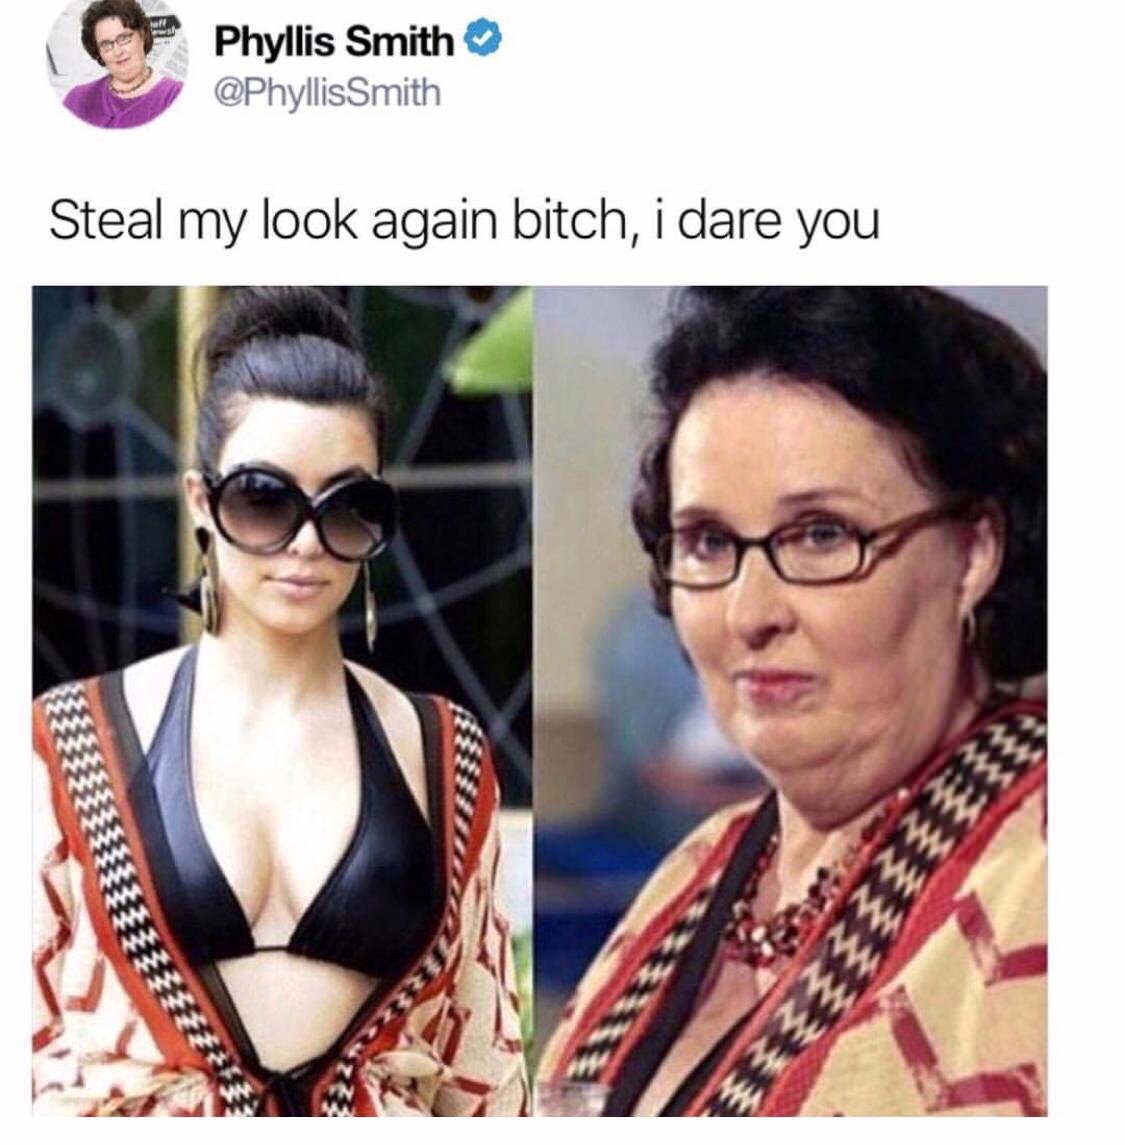 wore it better phyllis - Phyllis Smith Smith Steal my look again bitch, i dare you